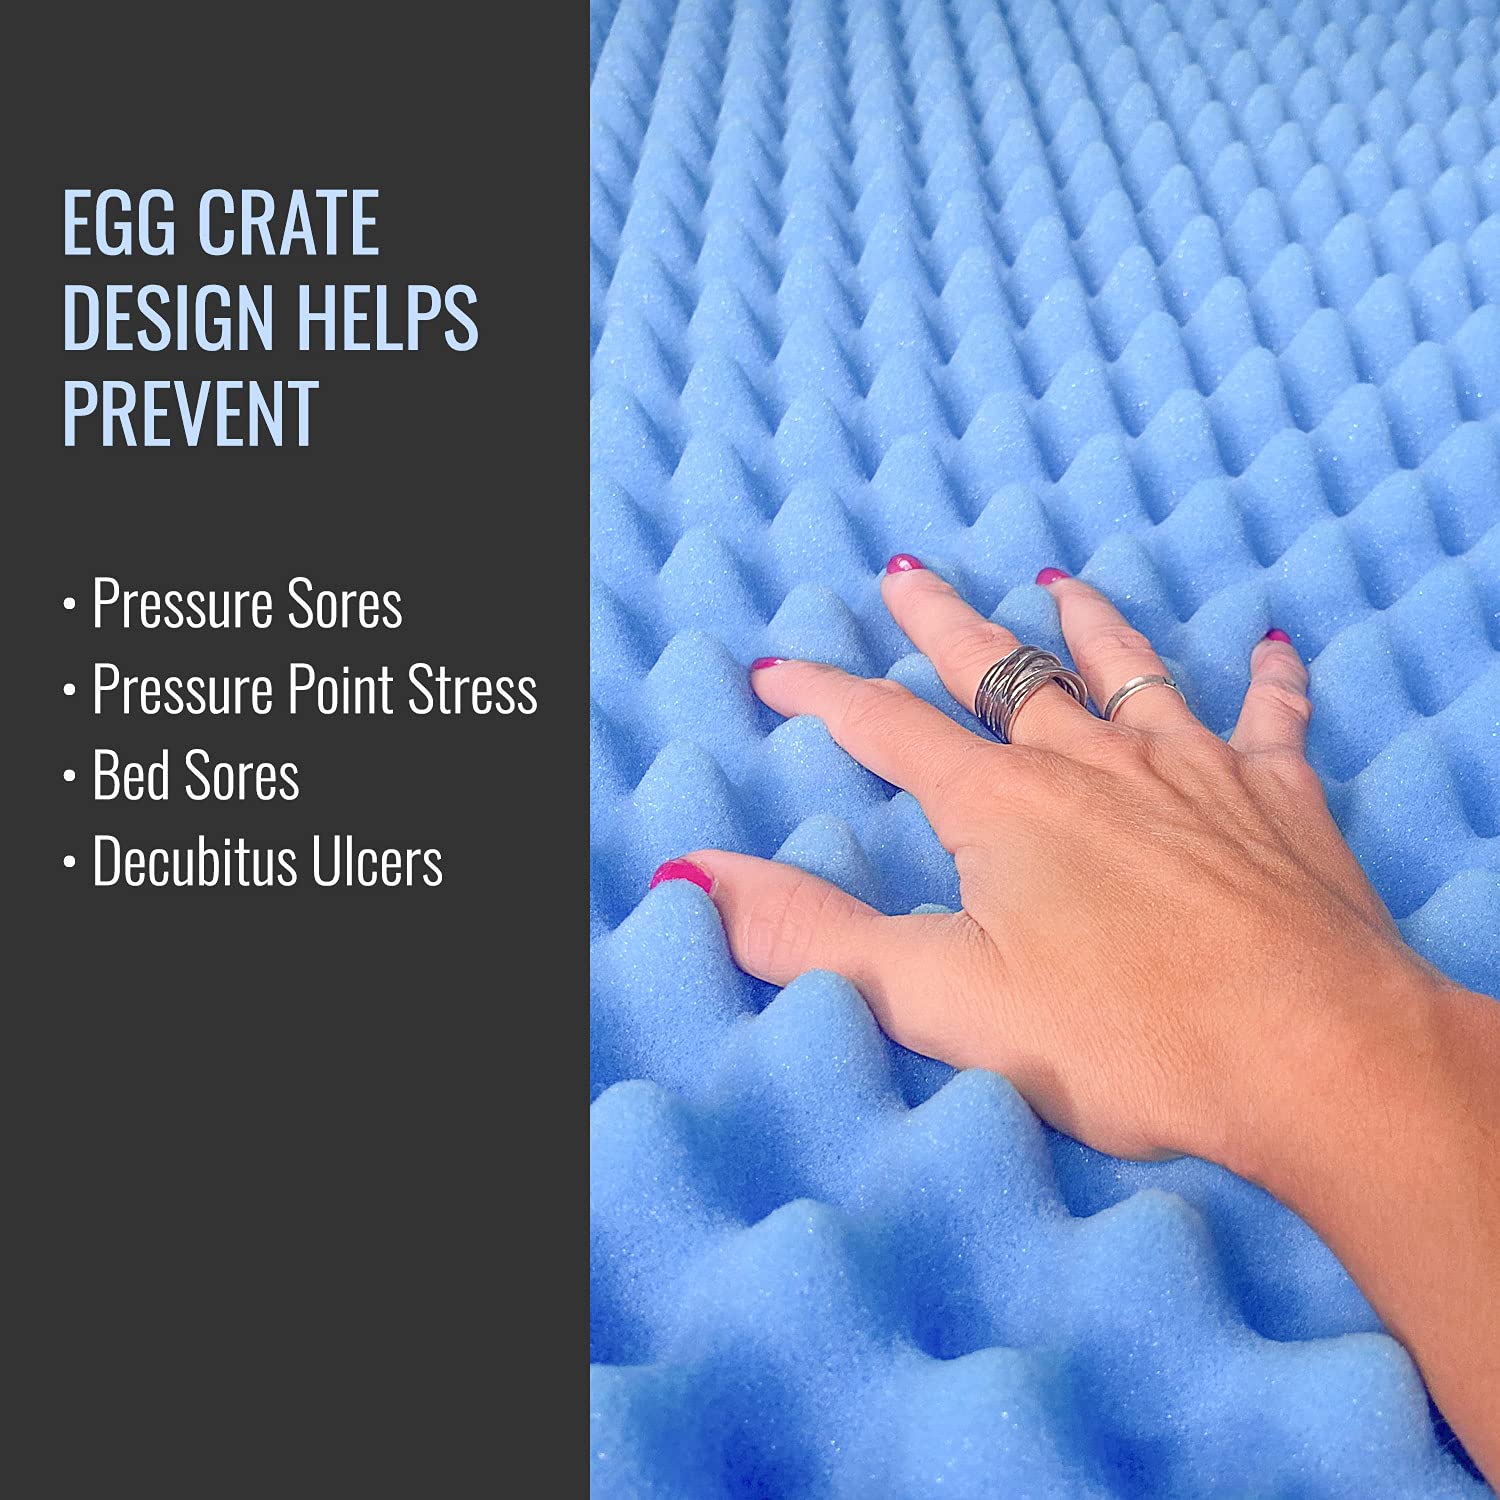 DMI Foam Mattress Topper, Egg Crate Foam Pad, Mattress Pad and Bed Topper for Support, Air Circulation, Pressure Relief and Weight Distribution, Hospital Size Mattress, 33 x 72 x 2,Blue